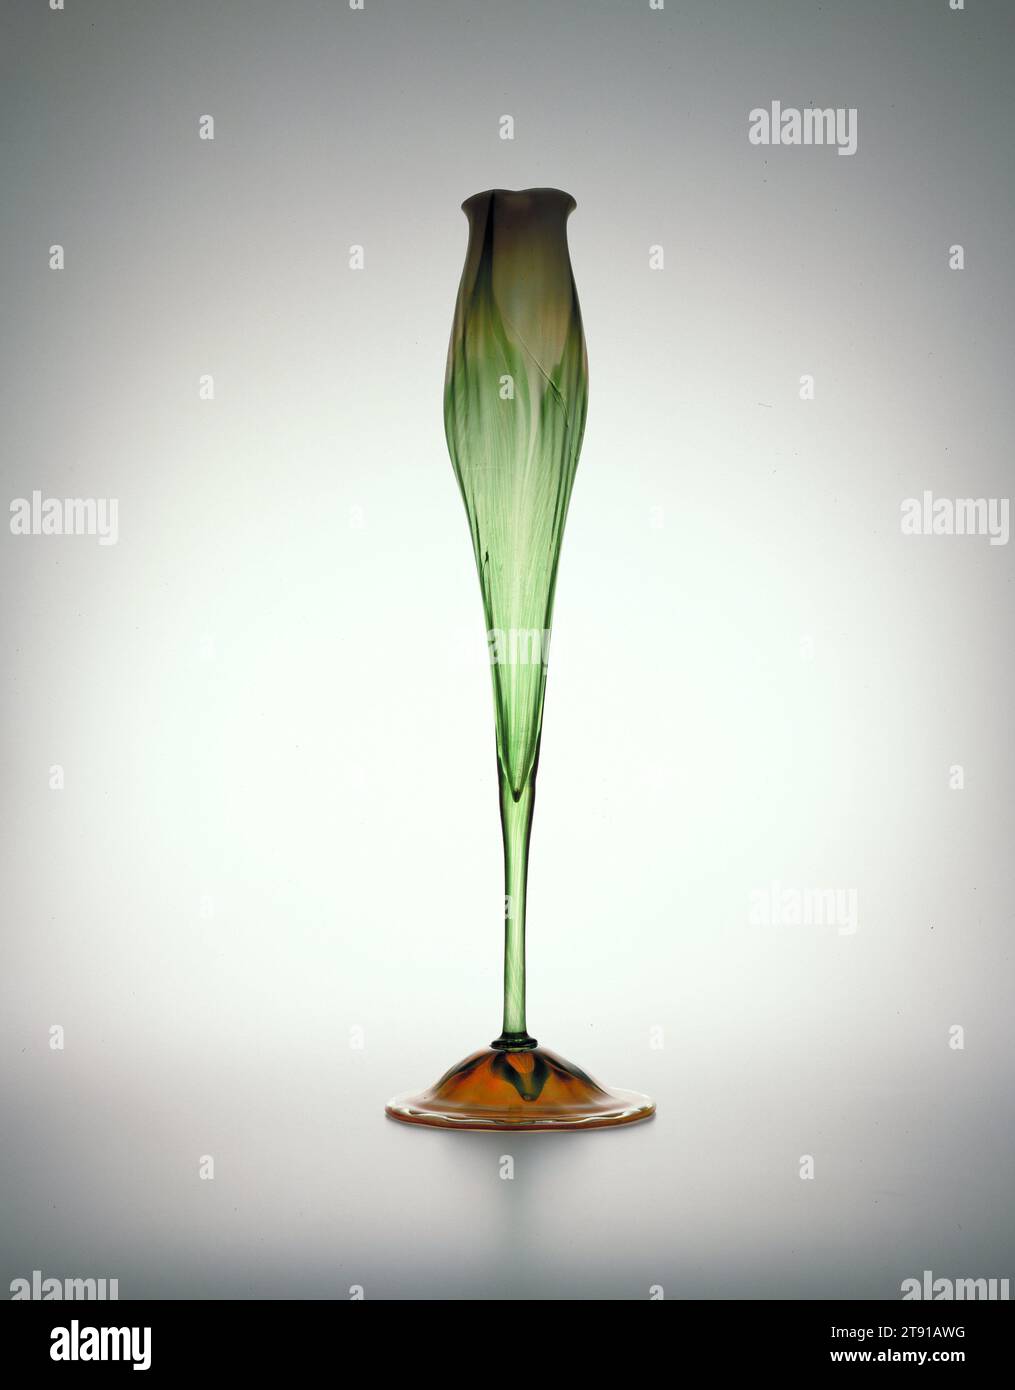 Floriform vase, c. 1890, Louis Comfort Tiffany; Manufacturer: Tiffany & Co., American, 1848–1933, 19 x 5 3/4 x 5 3/4 in. (48.26 x 14.61 x 14.61 cm), Blown iridescent glass, United States, 19th century, In 1894, the designer Louis Comfort Tiffany patented a process whereby hot glass was exposed to metallic fumes and oxides to create an iridescent surface. He named this glass Favrile from the Latin work faber, meaning artisan. Tiffany's Favrile glass was extremely popular internationally where it won honors at worlds fairs. Stock Photo